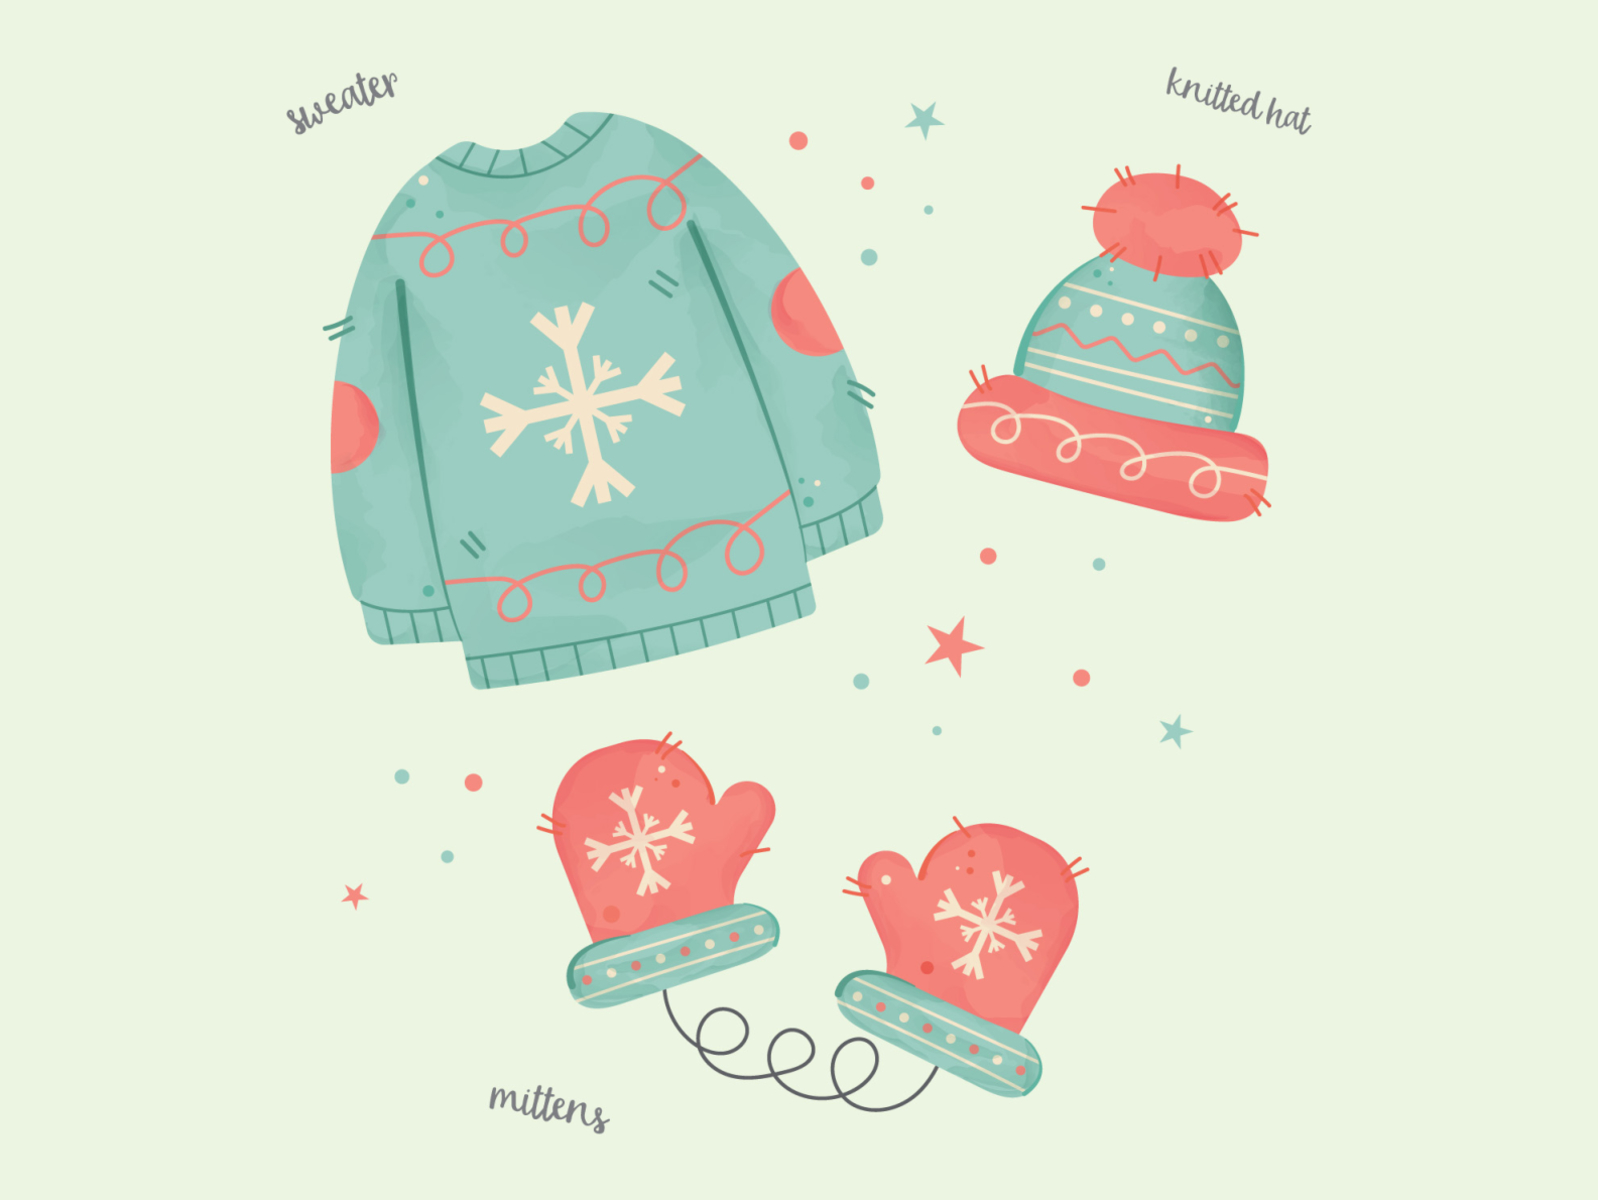 CUTE WINTER CLOTHES clothes cute design graphic design hat holiday illustration mittens old retro sweater vector vintage